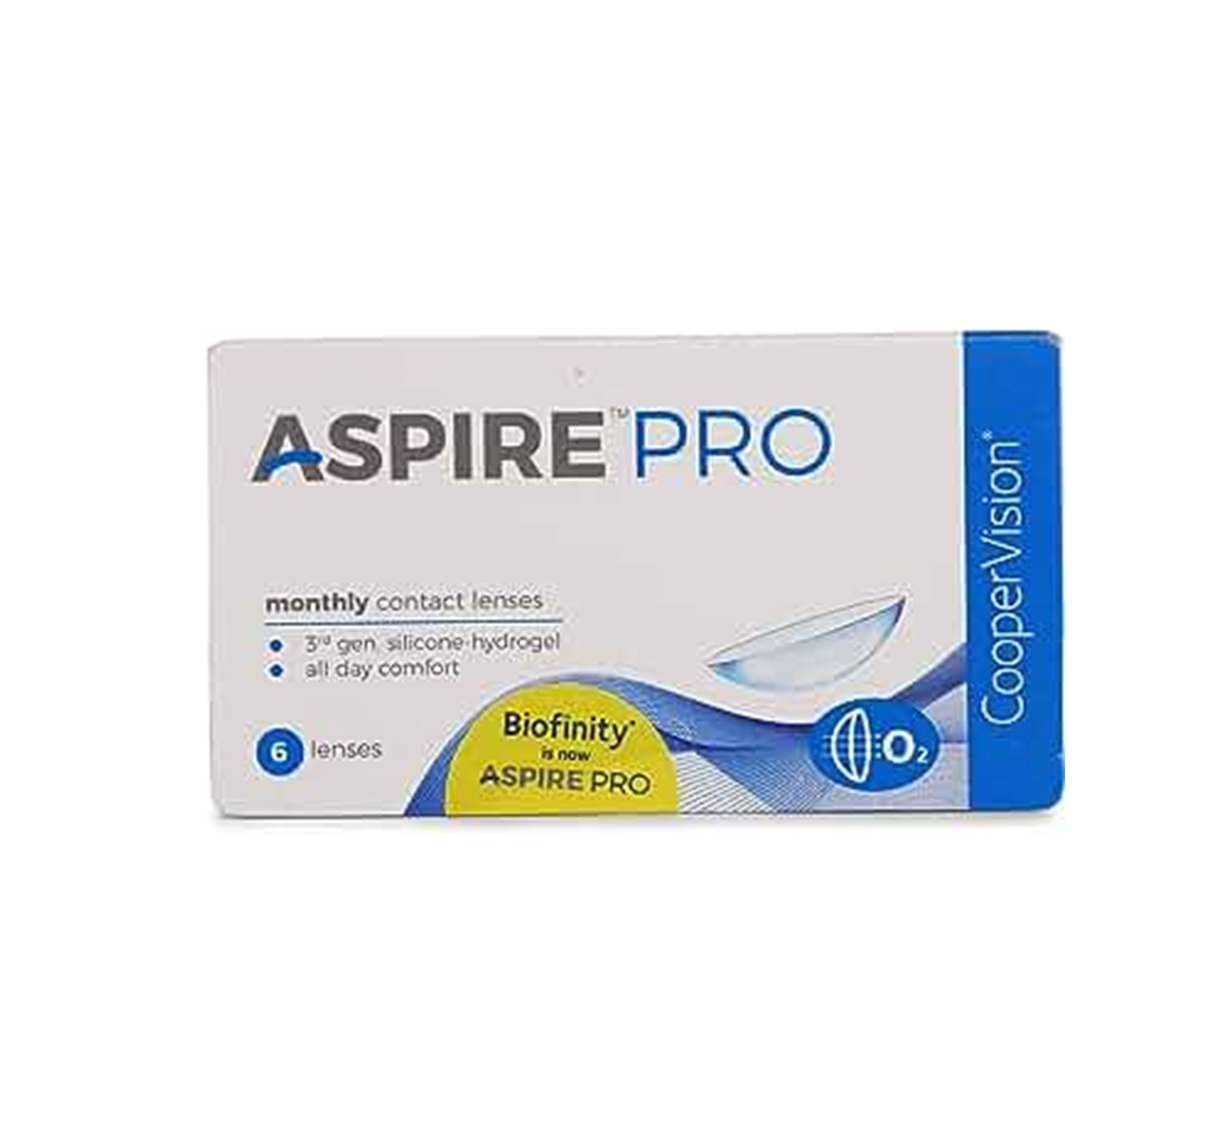 Aspire Pro Silicone Hydrogel Spherical Contact Lenses (6 lenses box)